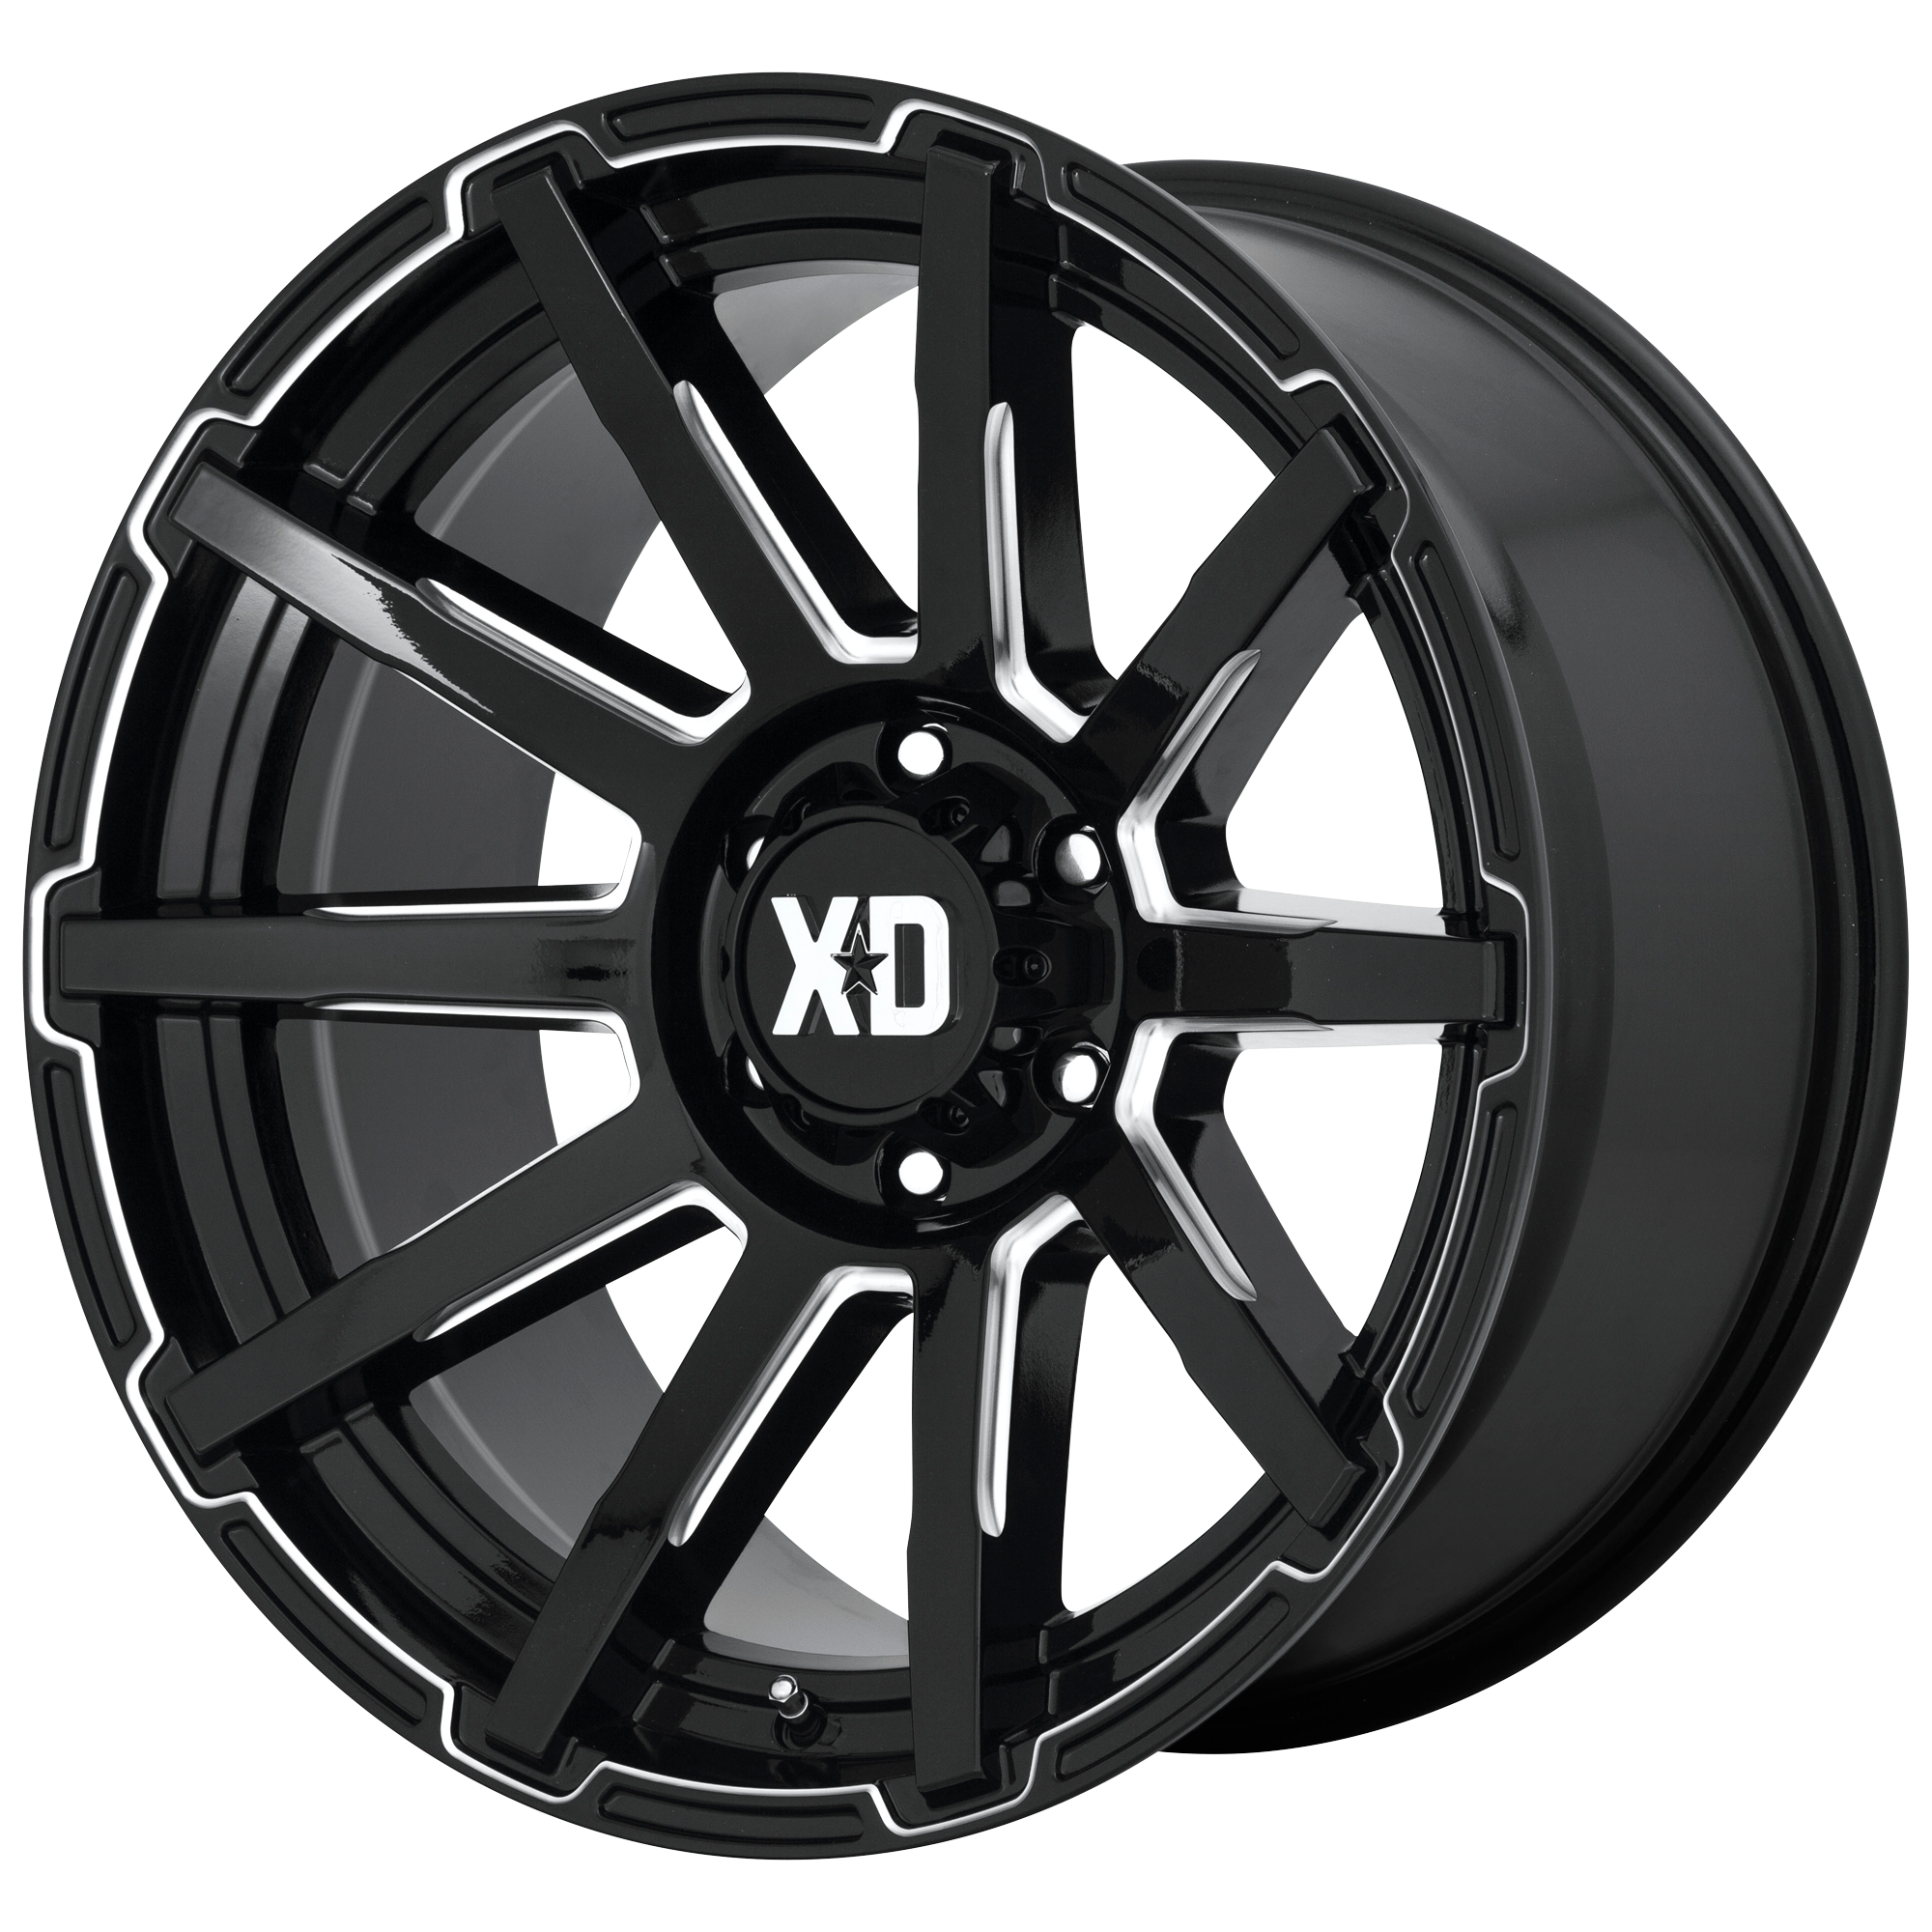 OUTBREAK 18x9 5x150.00 GLOSS BLACK MILLED (12 mm) - Tires and Engine Performance